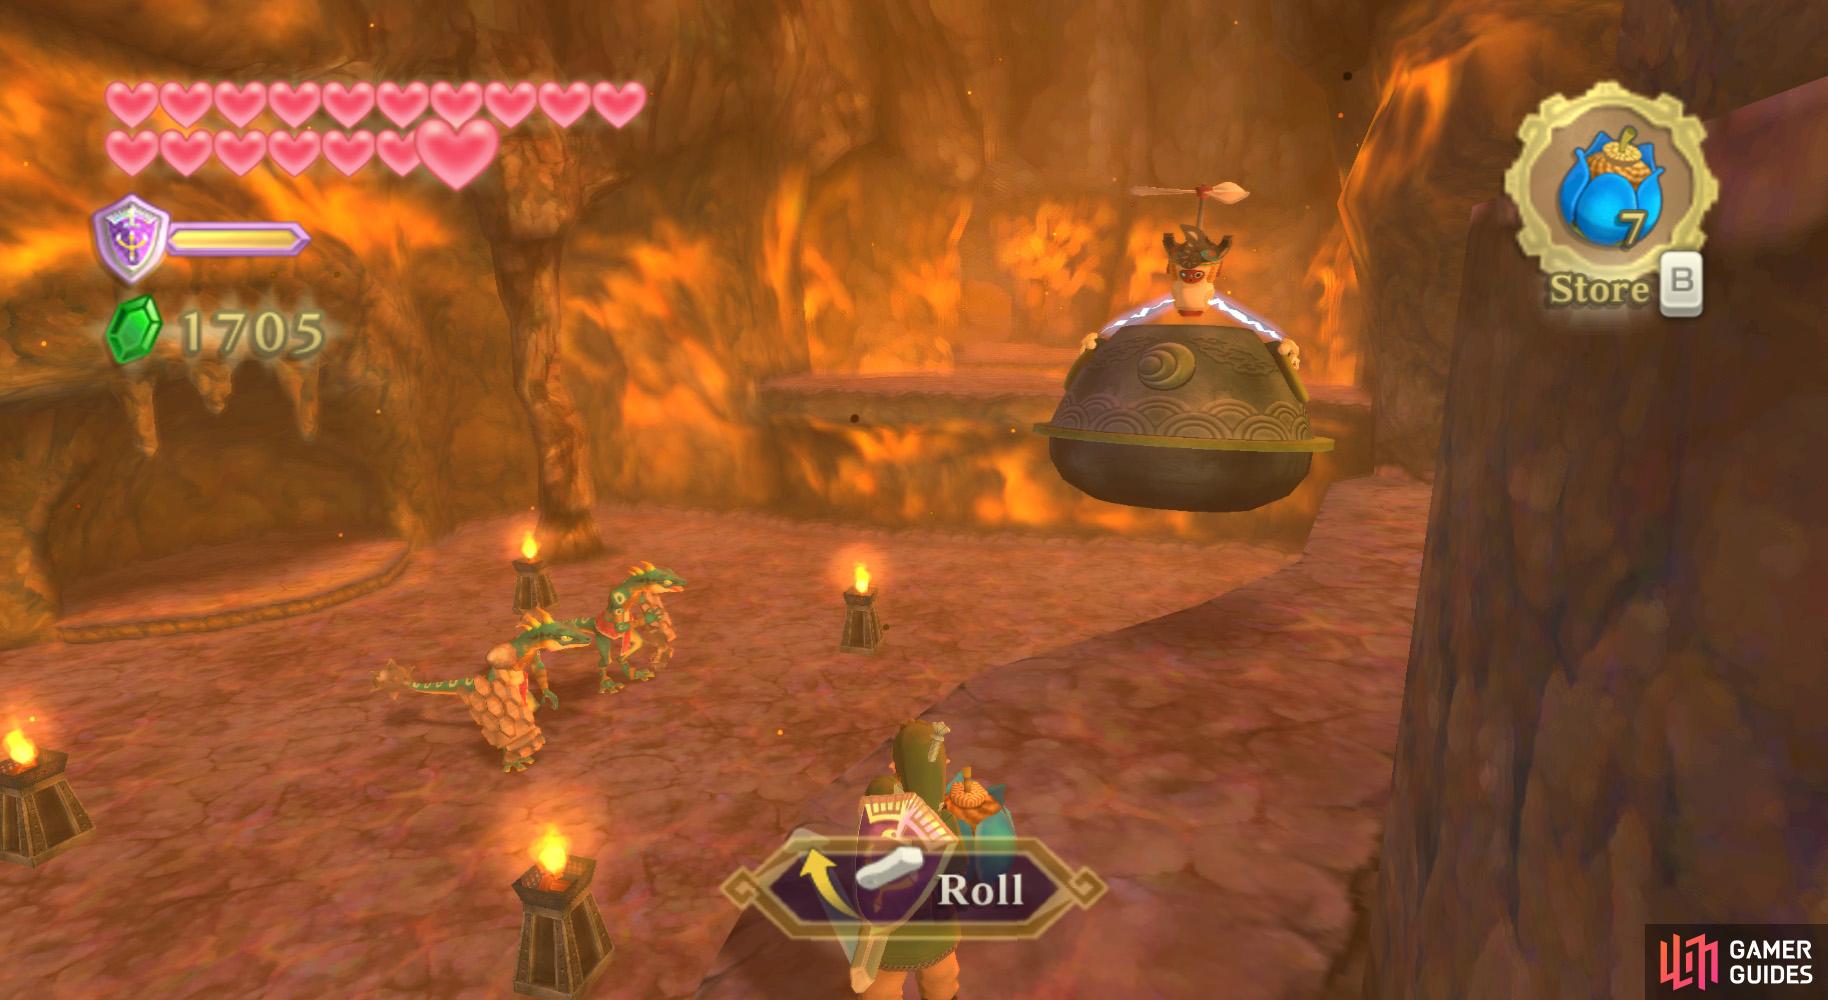 One thing you can try, if the Lizalfos haven't seen you, is to run from them after distracting them with a bomb.